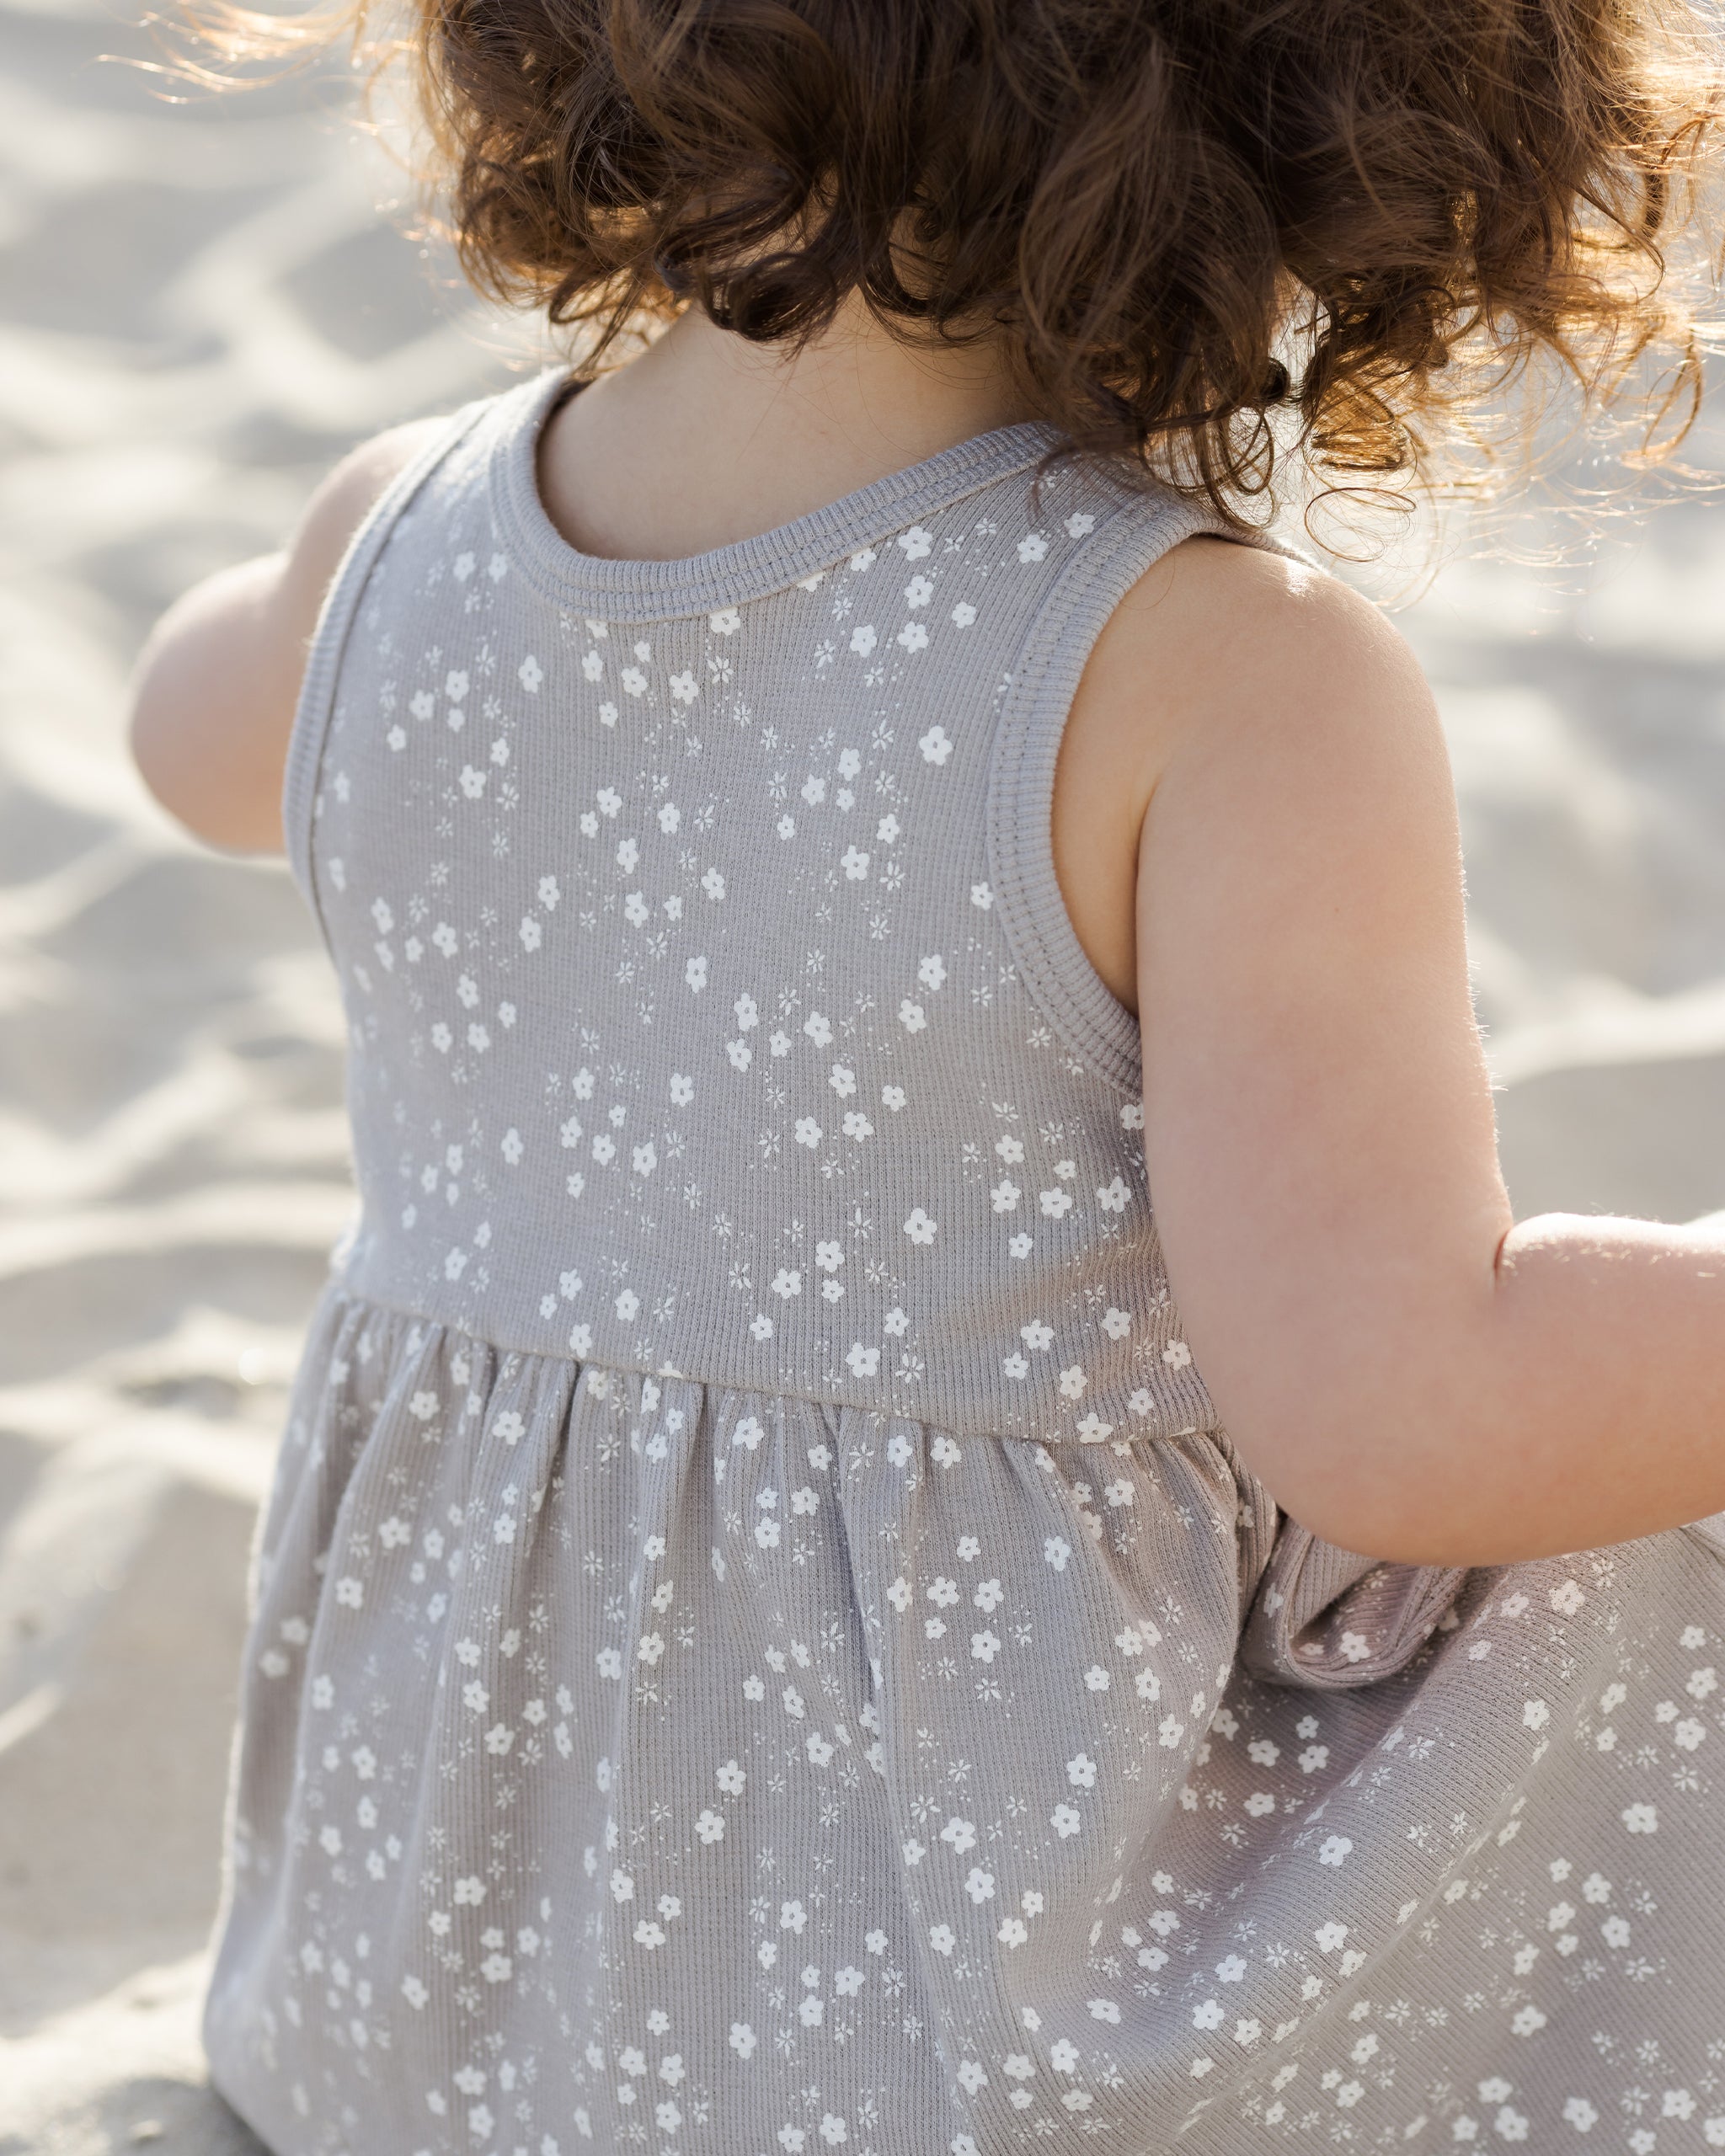 Ribbed Tank Dress || Fleur - Rylee + Cru | Kids Clothes | Trendy Baby Clothes | Modern Infant Outfits |